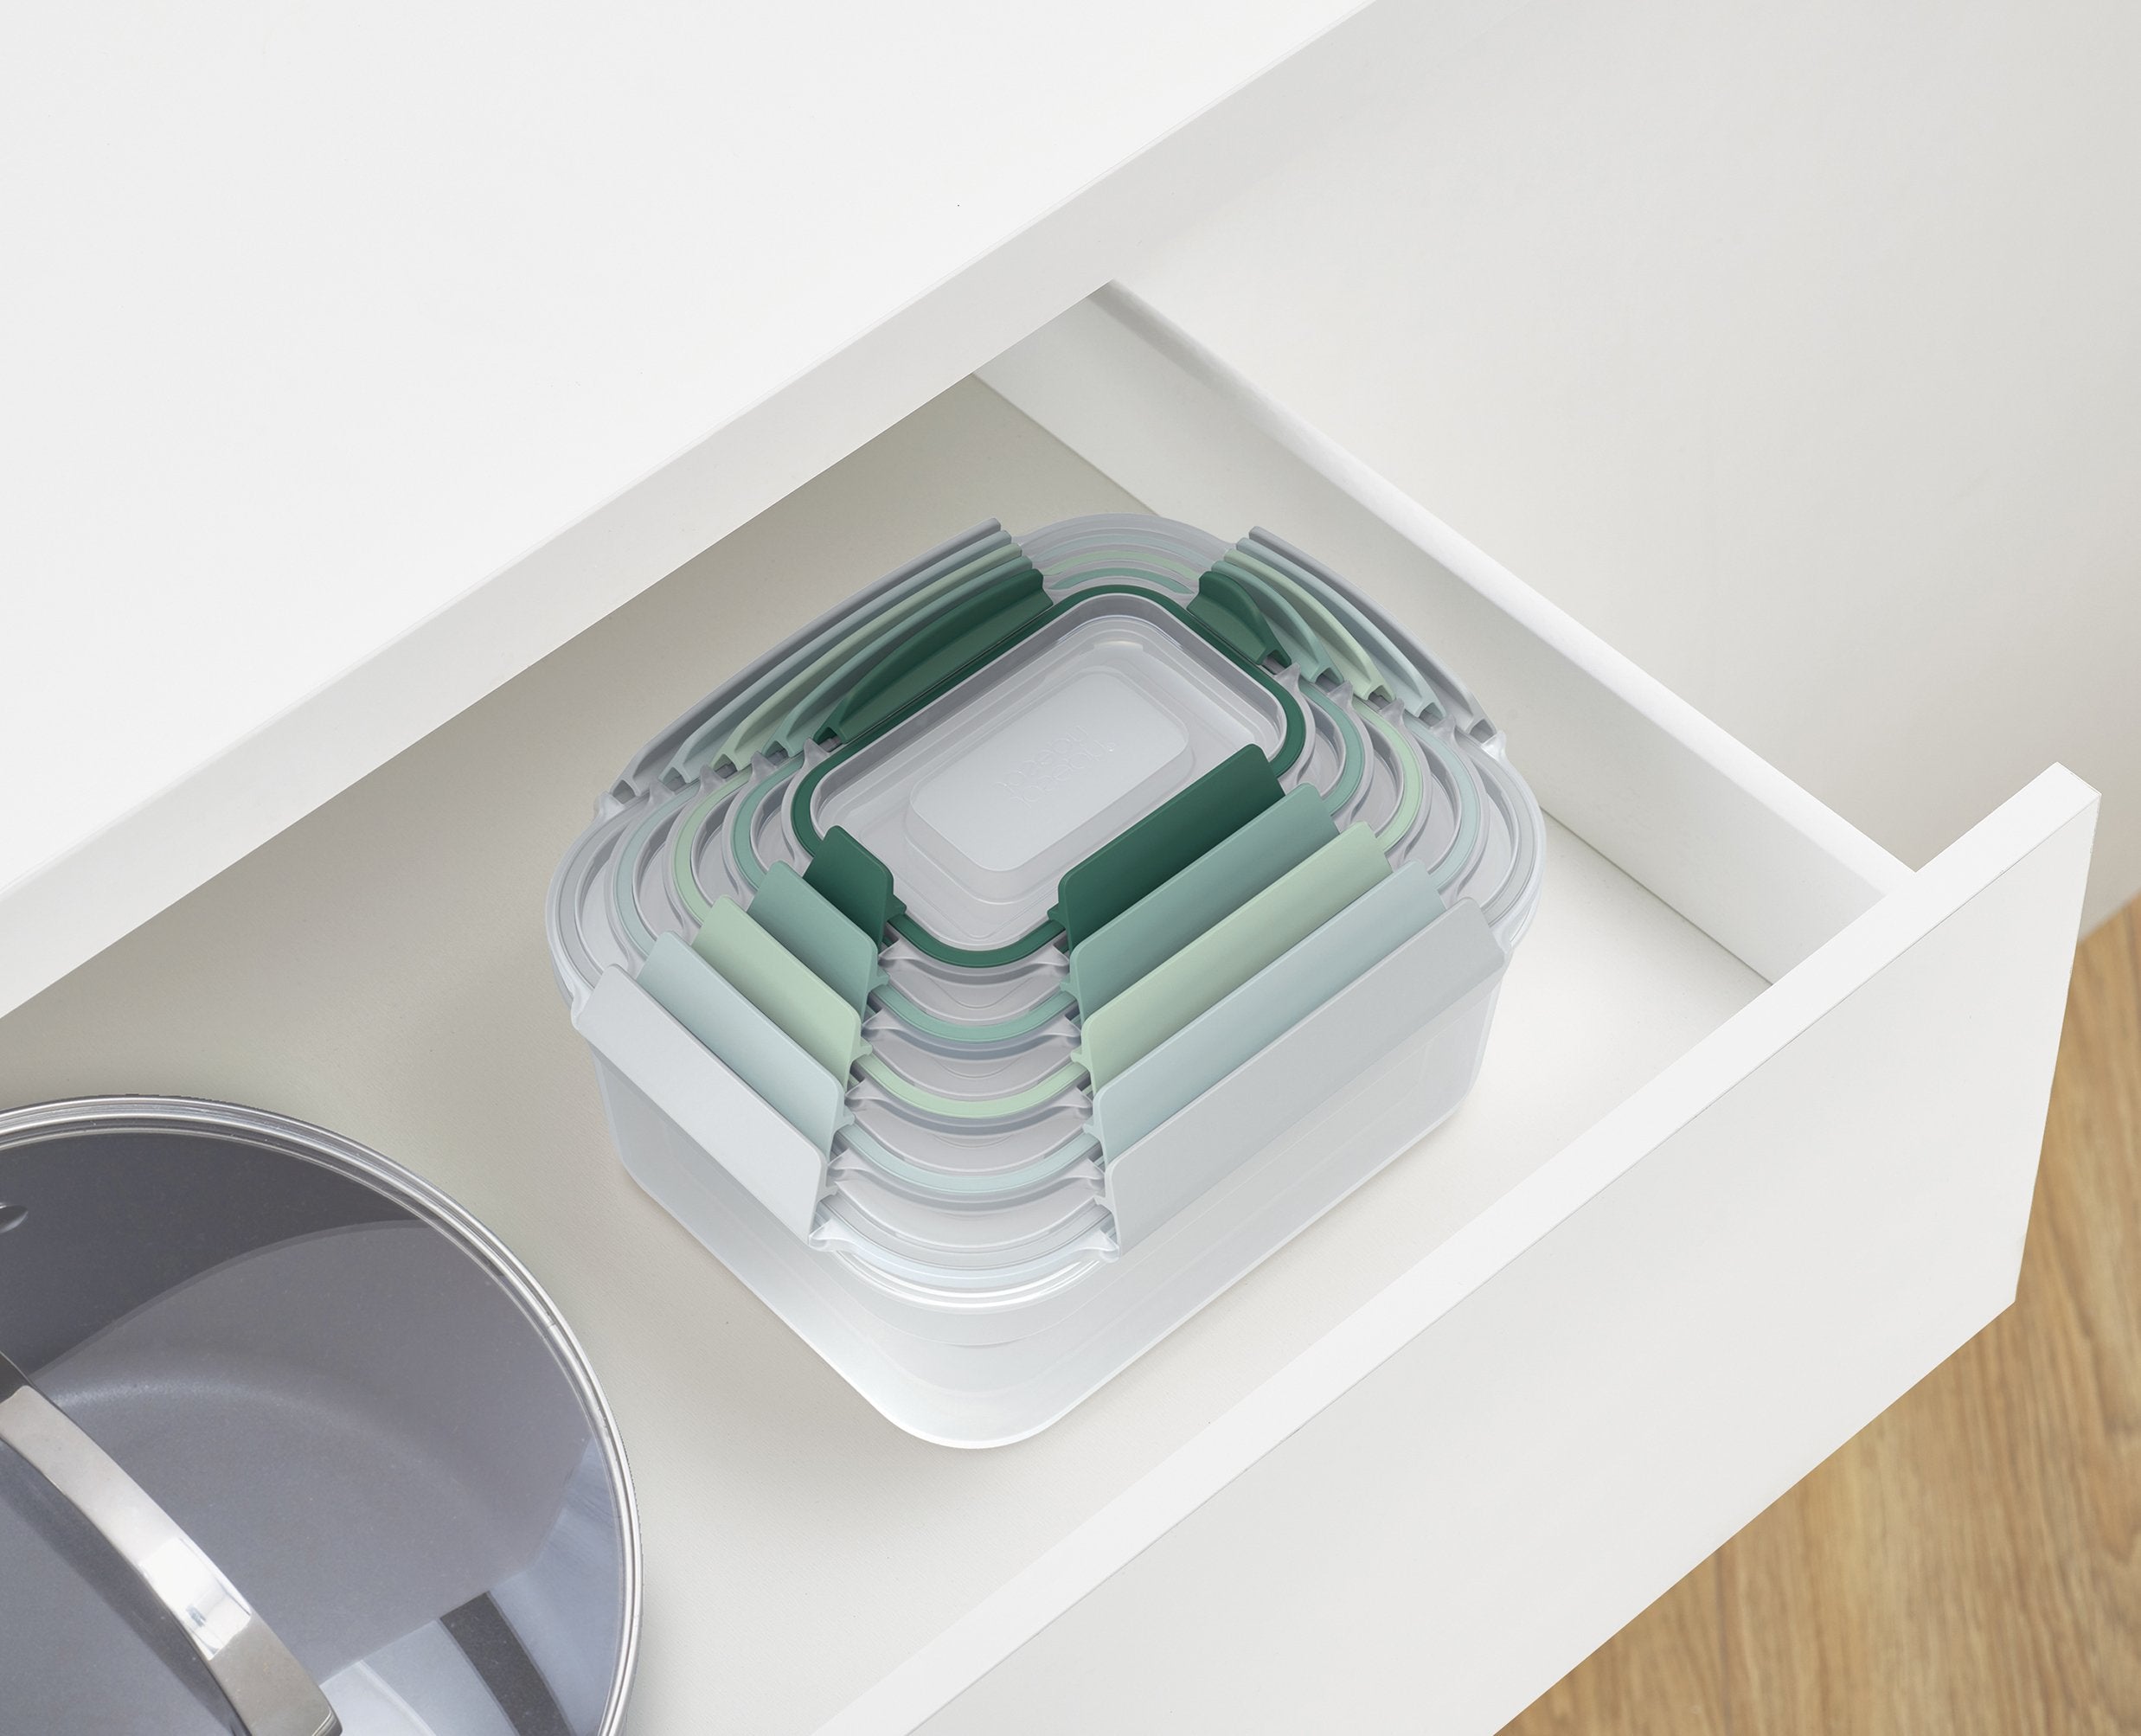 BEON.COM.AU Product Details The unique design of these food storage containers means the bases nest neatly inside each other while the lids clip conveniently together for efficient, space-saving storage.  Space-saving, nesting design Easy-find, snap-together lids and colour-coded bases Airtight, leakproof an... Joseph Joseph at BEON.COM.AU